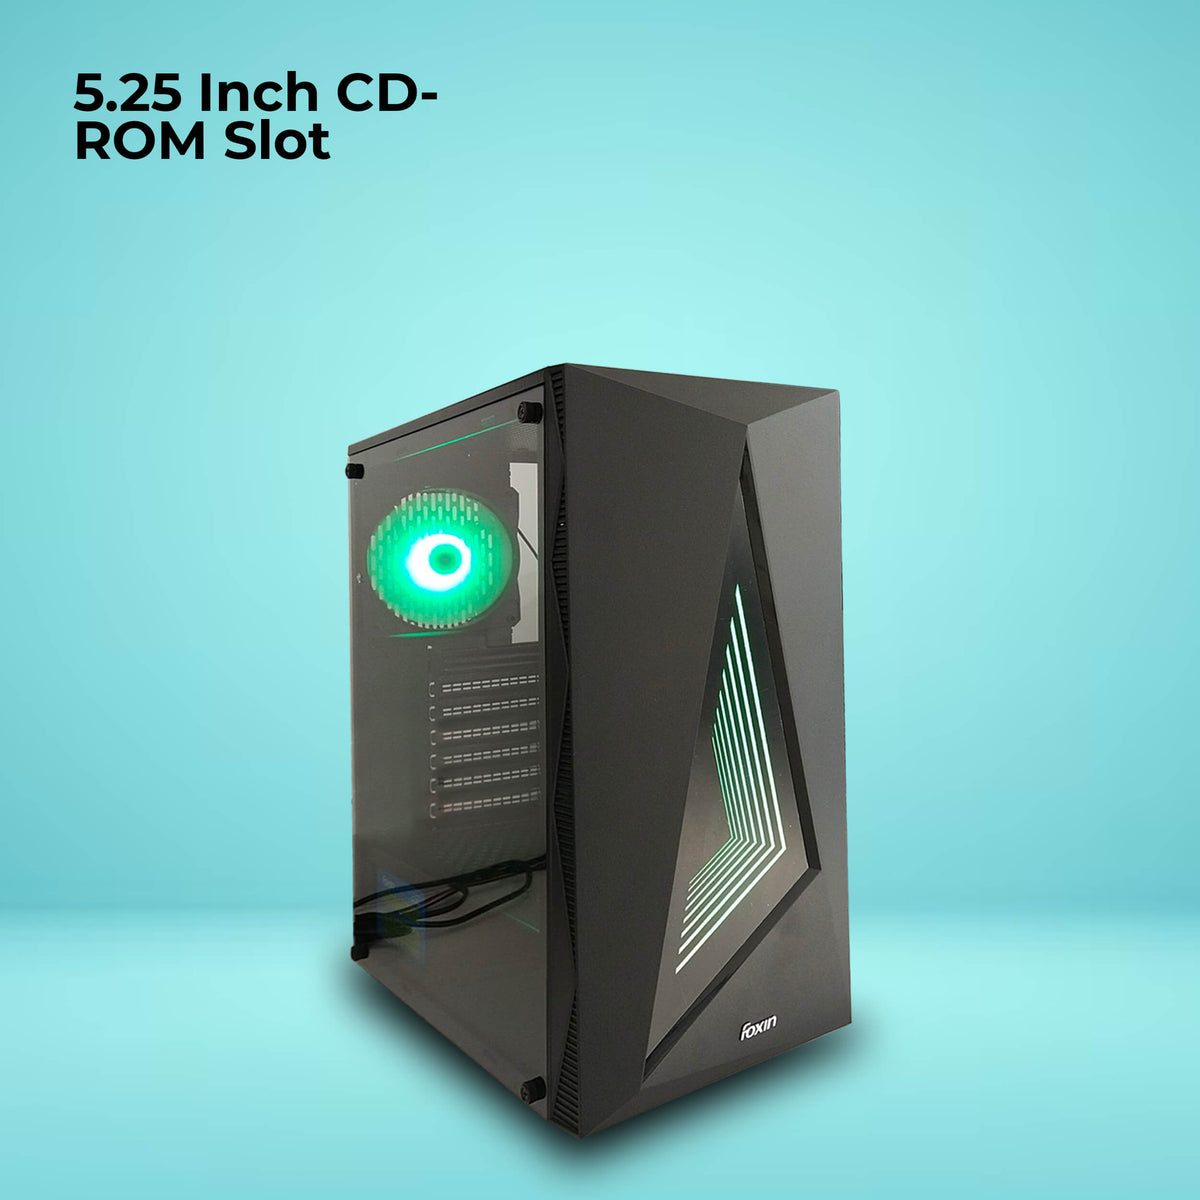 Foxin Plutonium RGB Gaming Tower Cabinet | with Steel Metal Body | Front Panel 2 x USB 1.0 Port | HD Audio / MIC Jack Port | 8 CM x 12 CM Fan Position